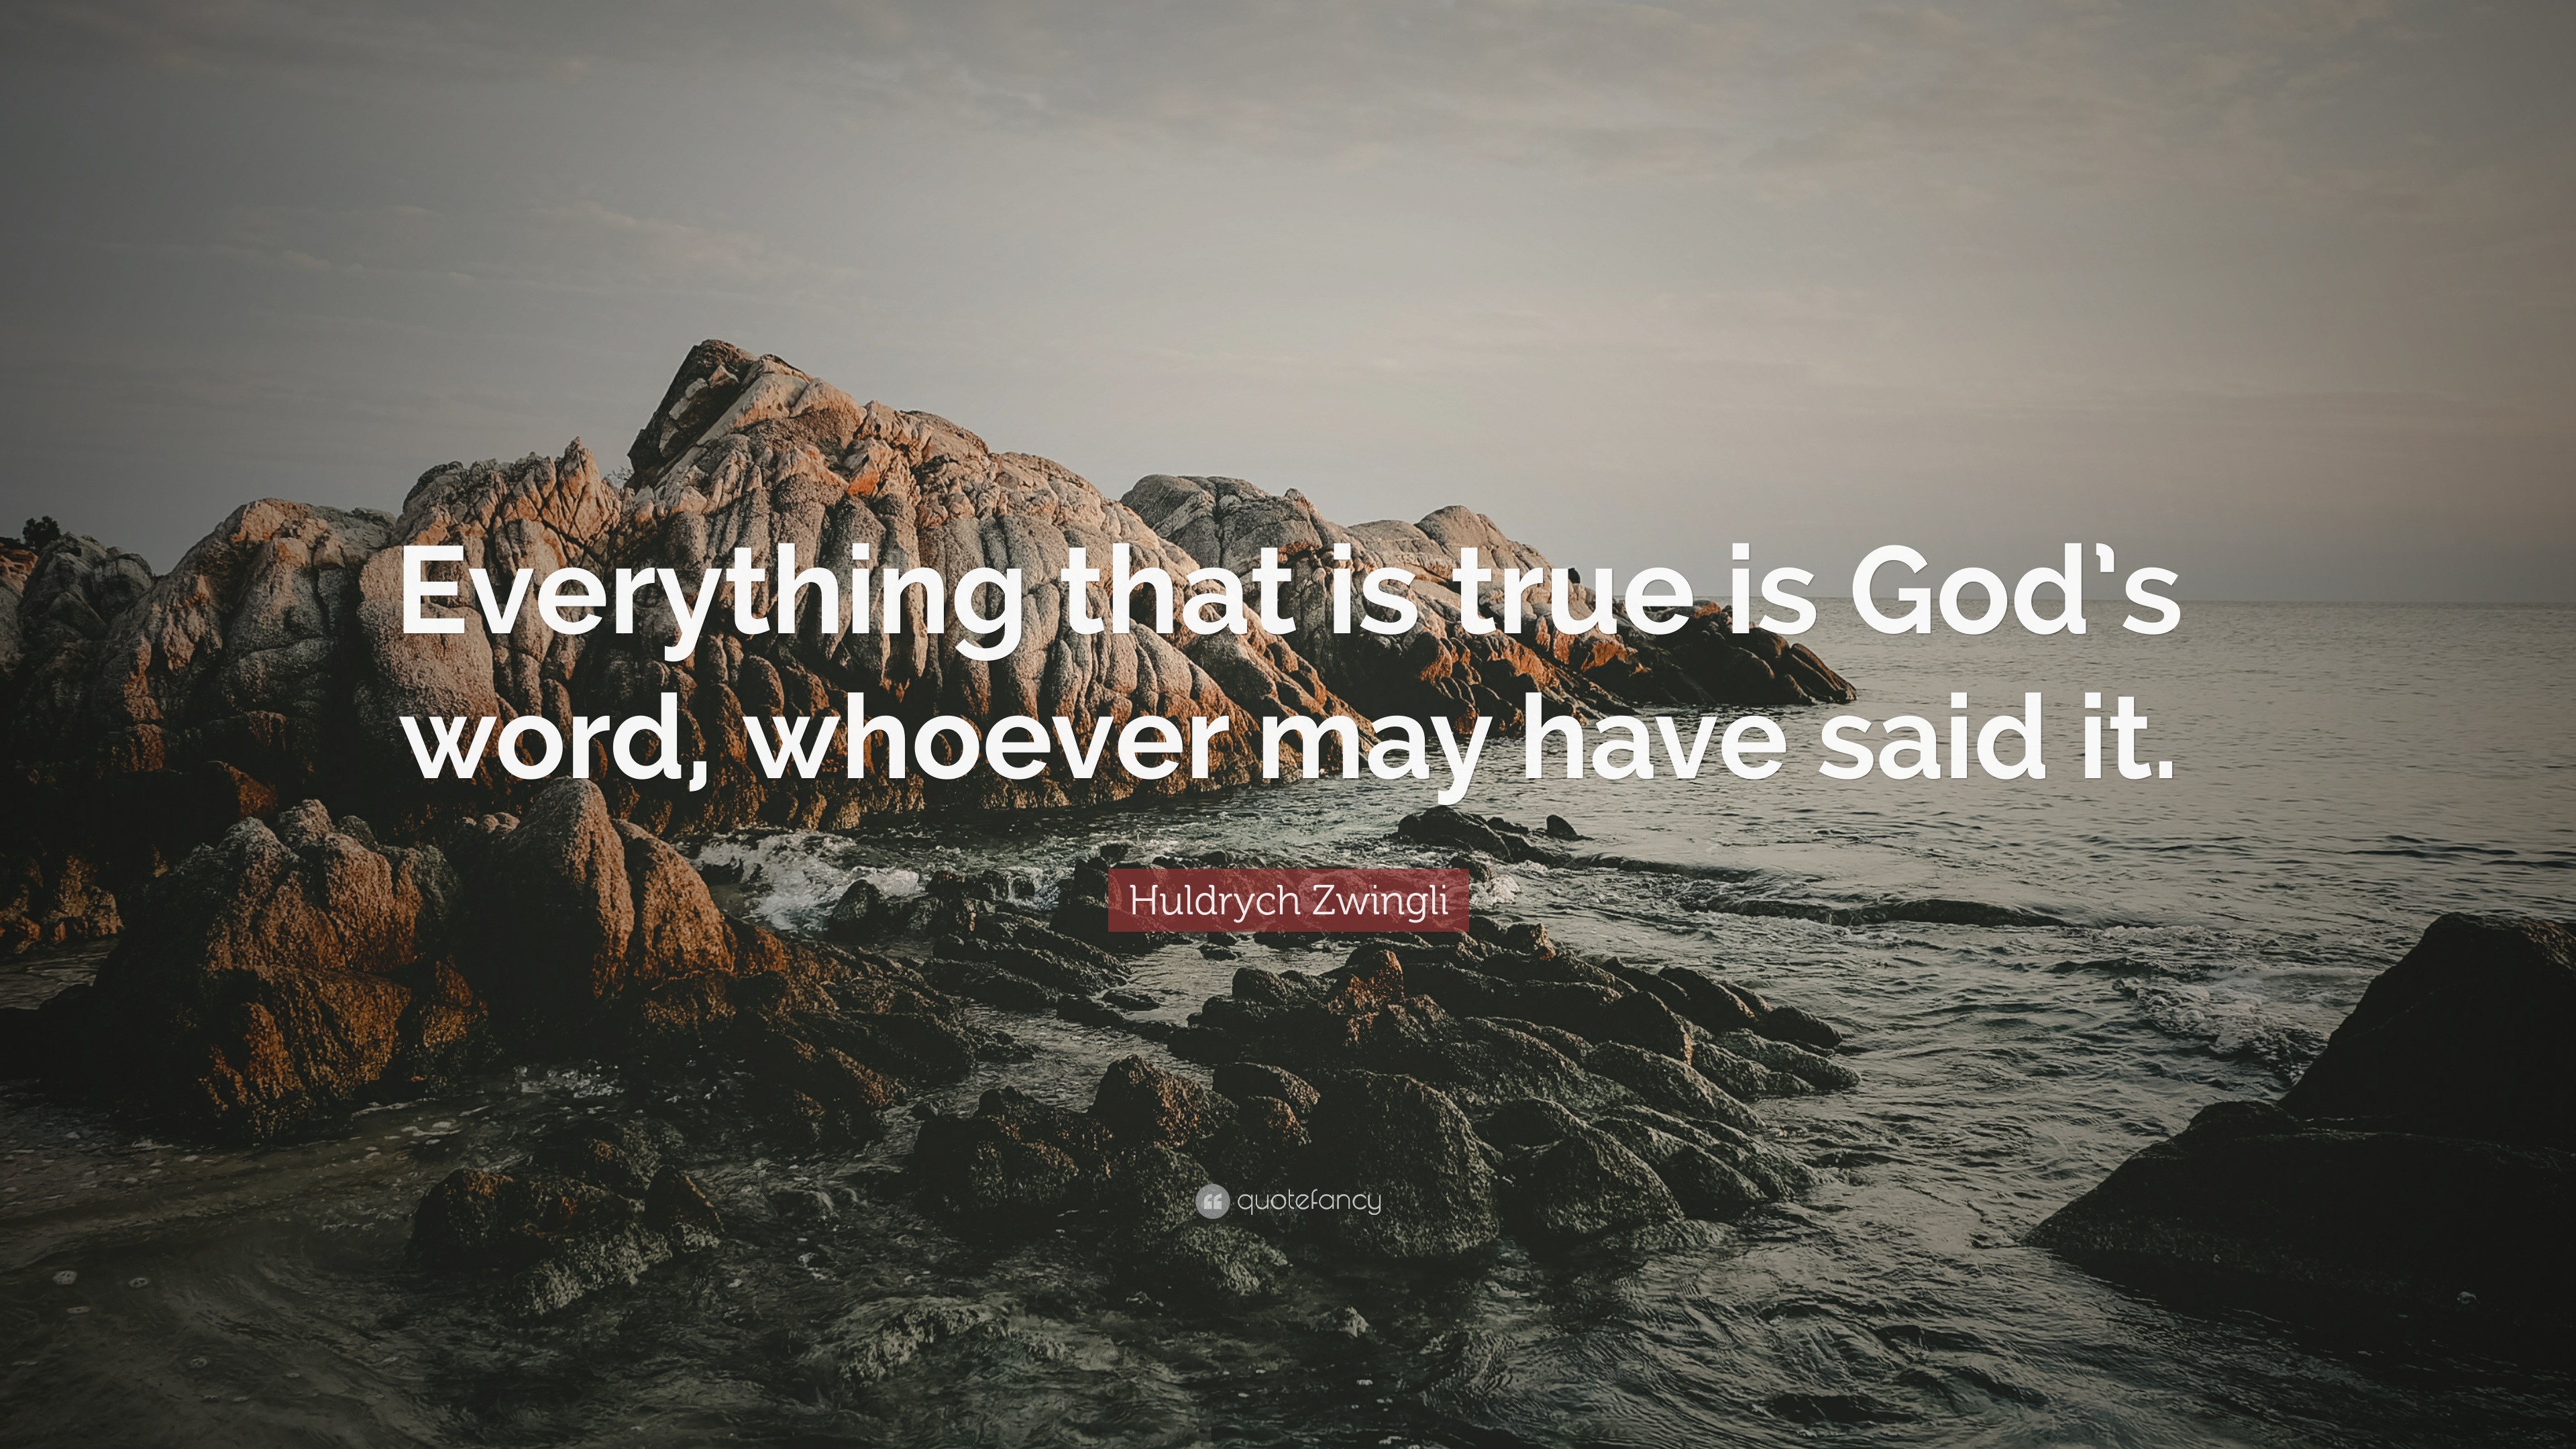 Huldrych Zwingli Quote: “Everything that is true is God’s word, whoever ...